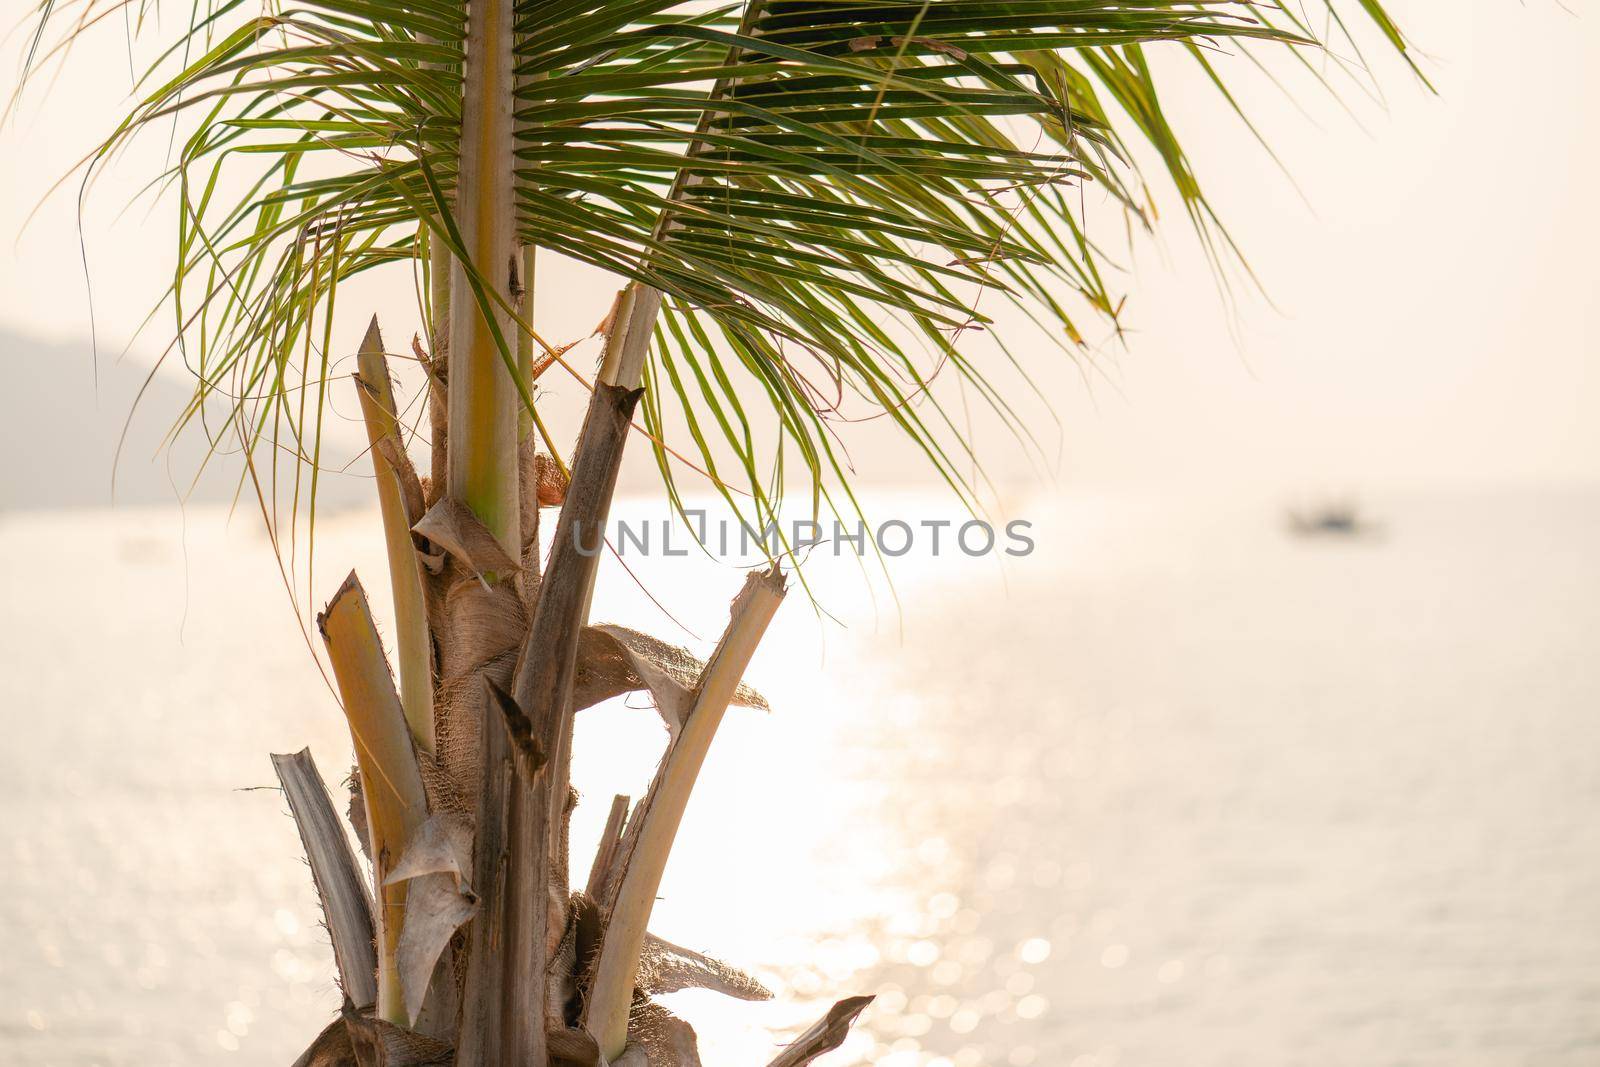 Sunset over the sea with Coconut palm tree on the tropical beach and orange pastel sky.